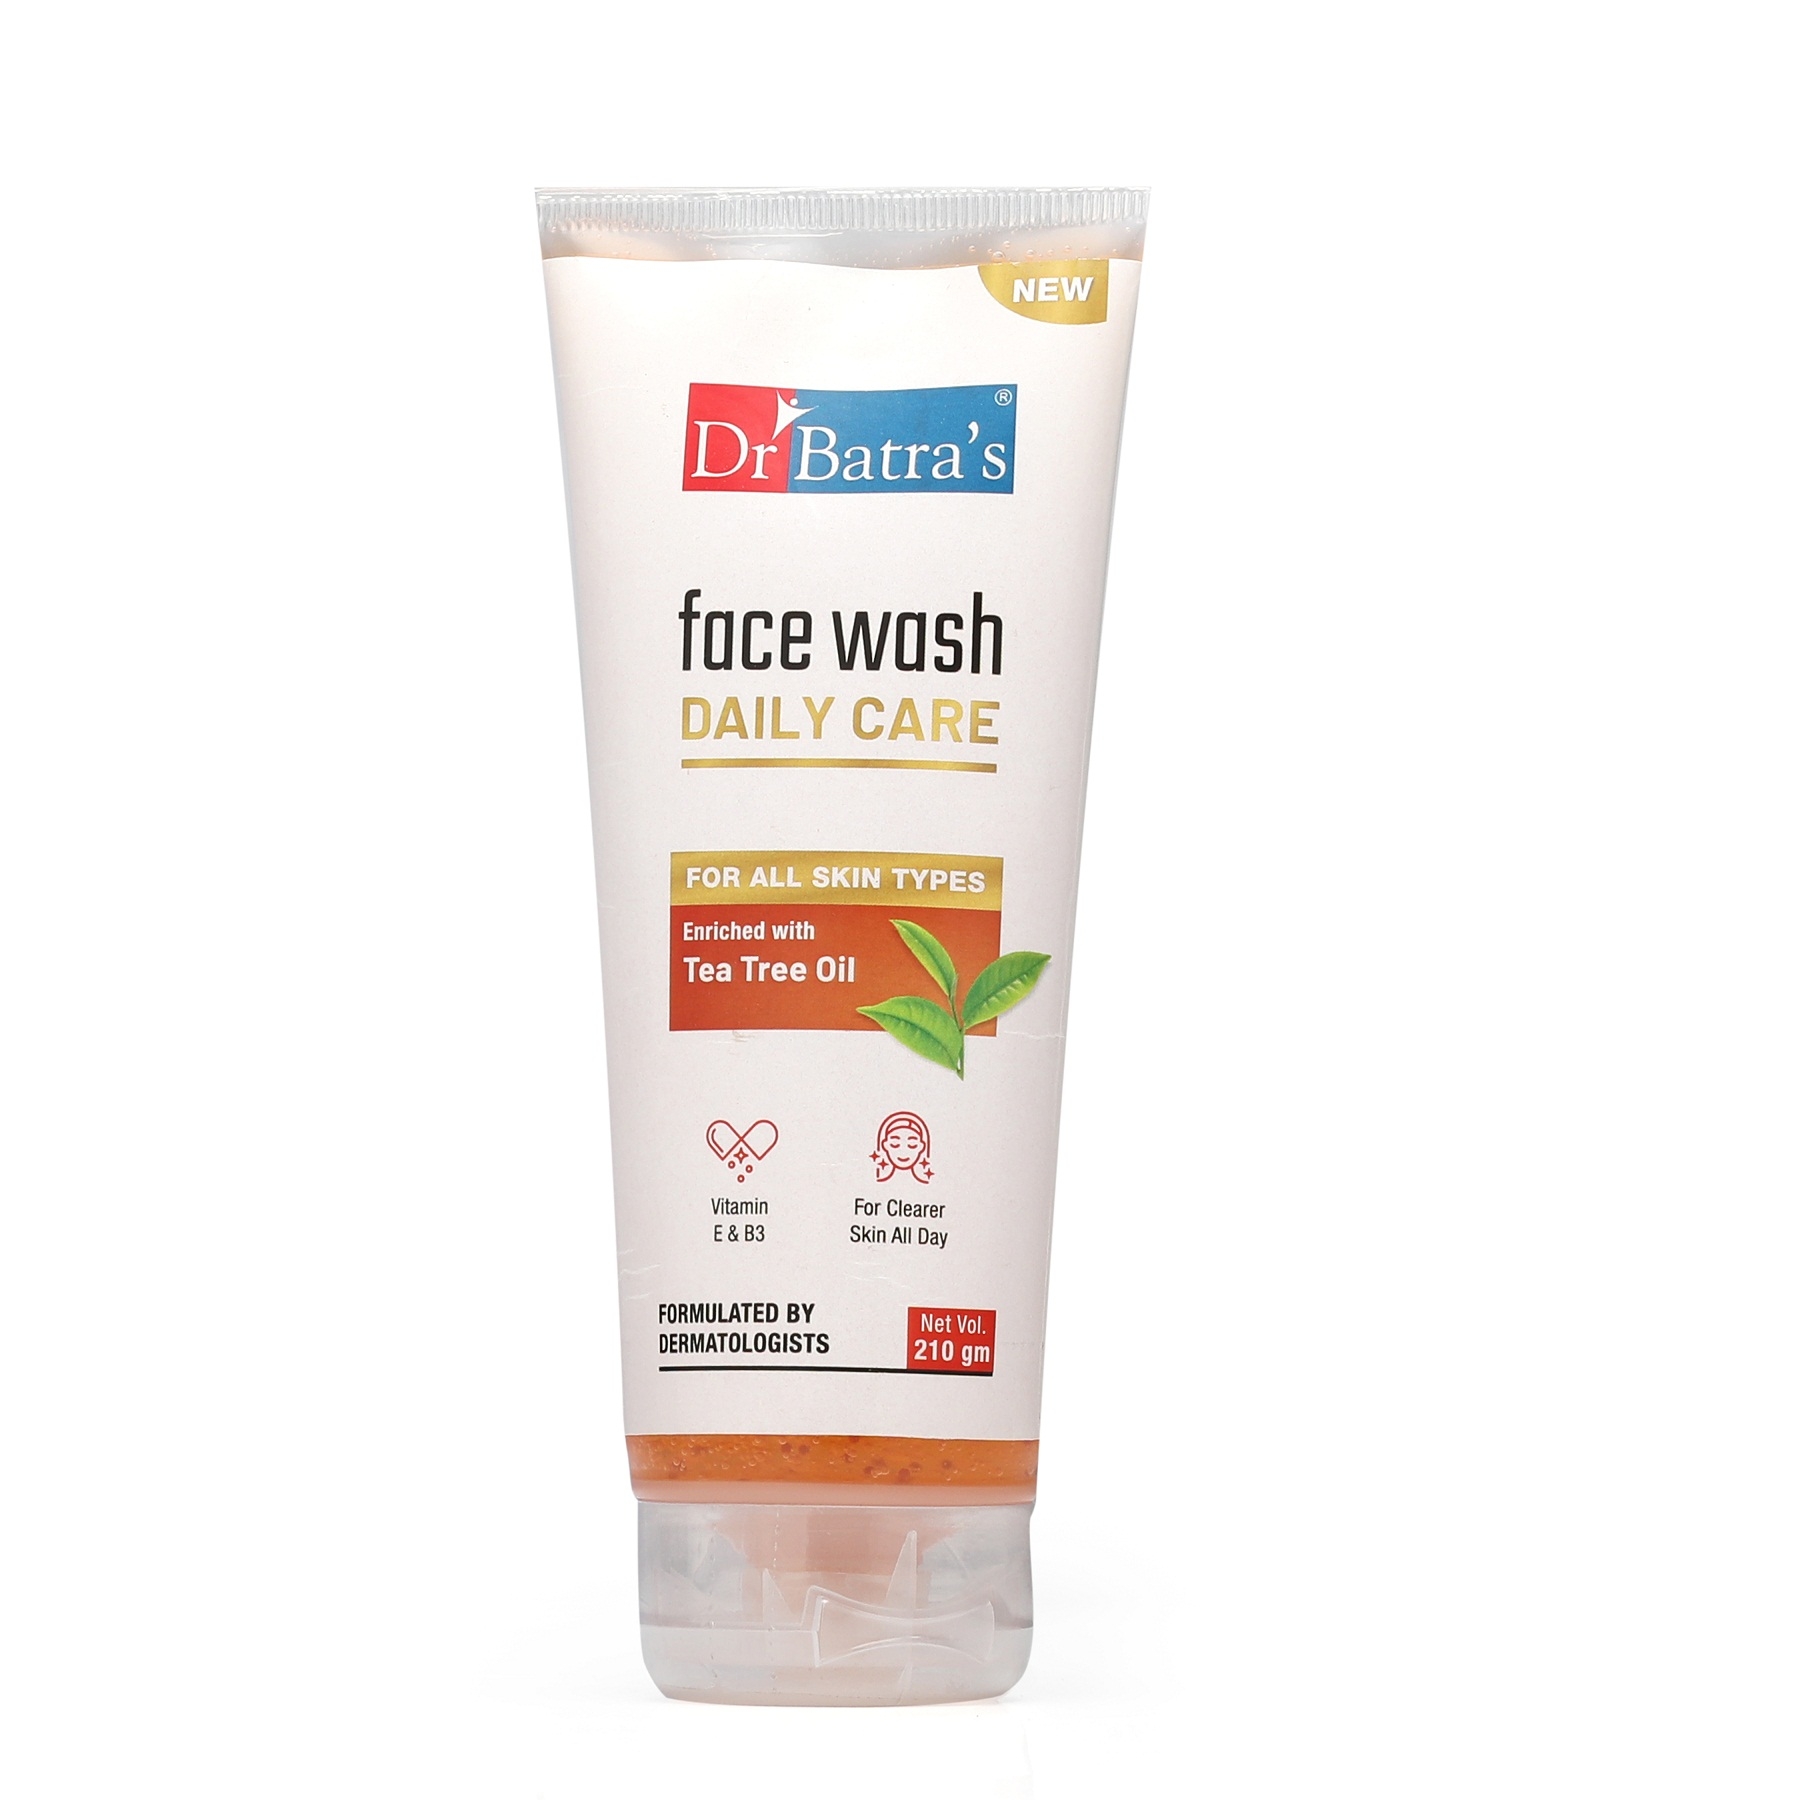 Dr Batra's Face Wash Daily Care Enriched With Tea Tree Oil - 210g